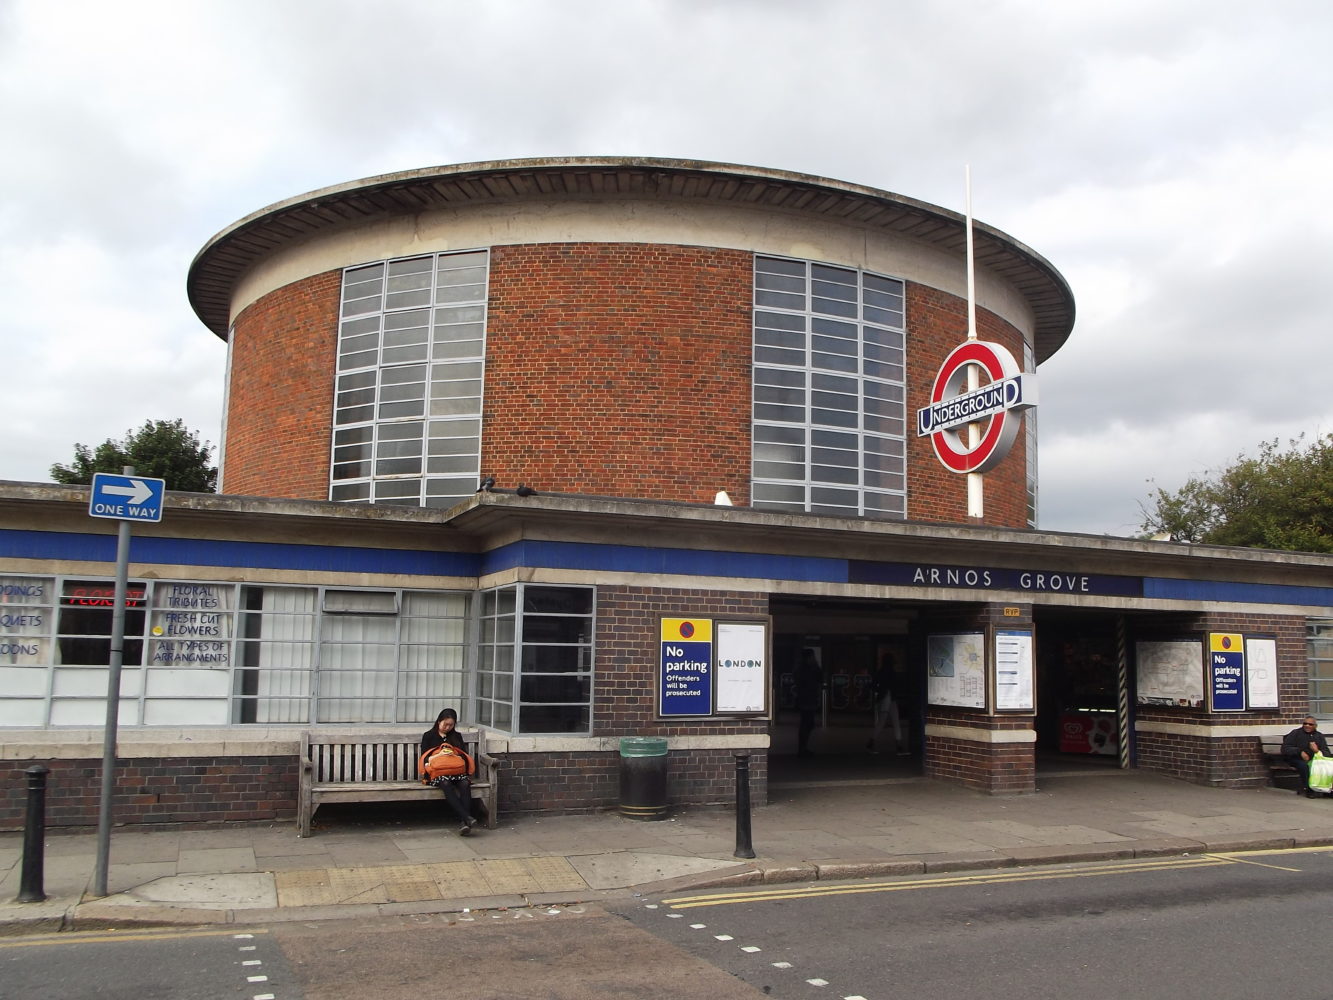 Arnos Grove Station, designed by renowned architect Charles Holden and opened in 1932, is Grade 2*-listed